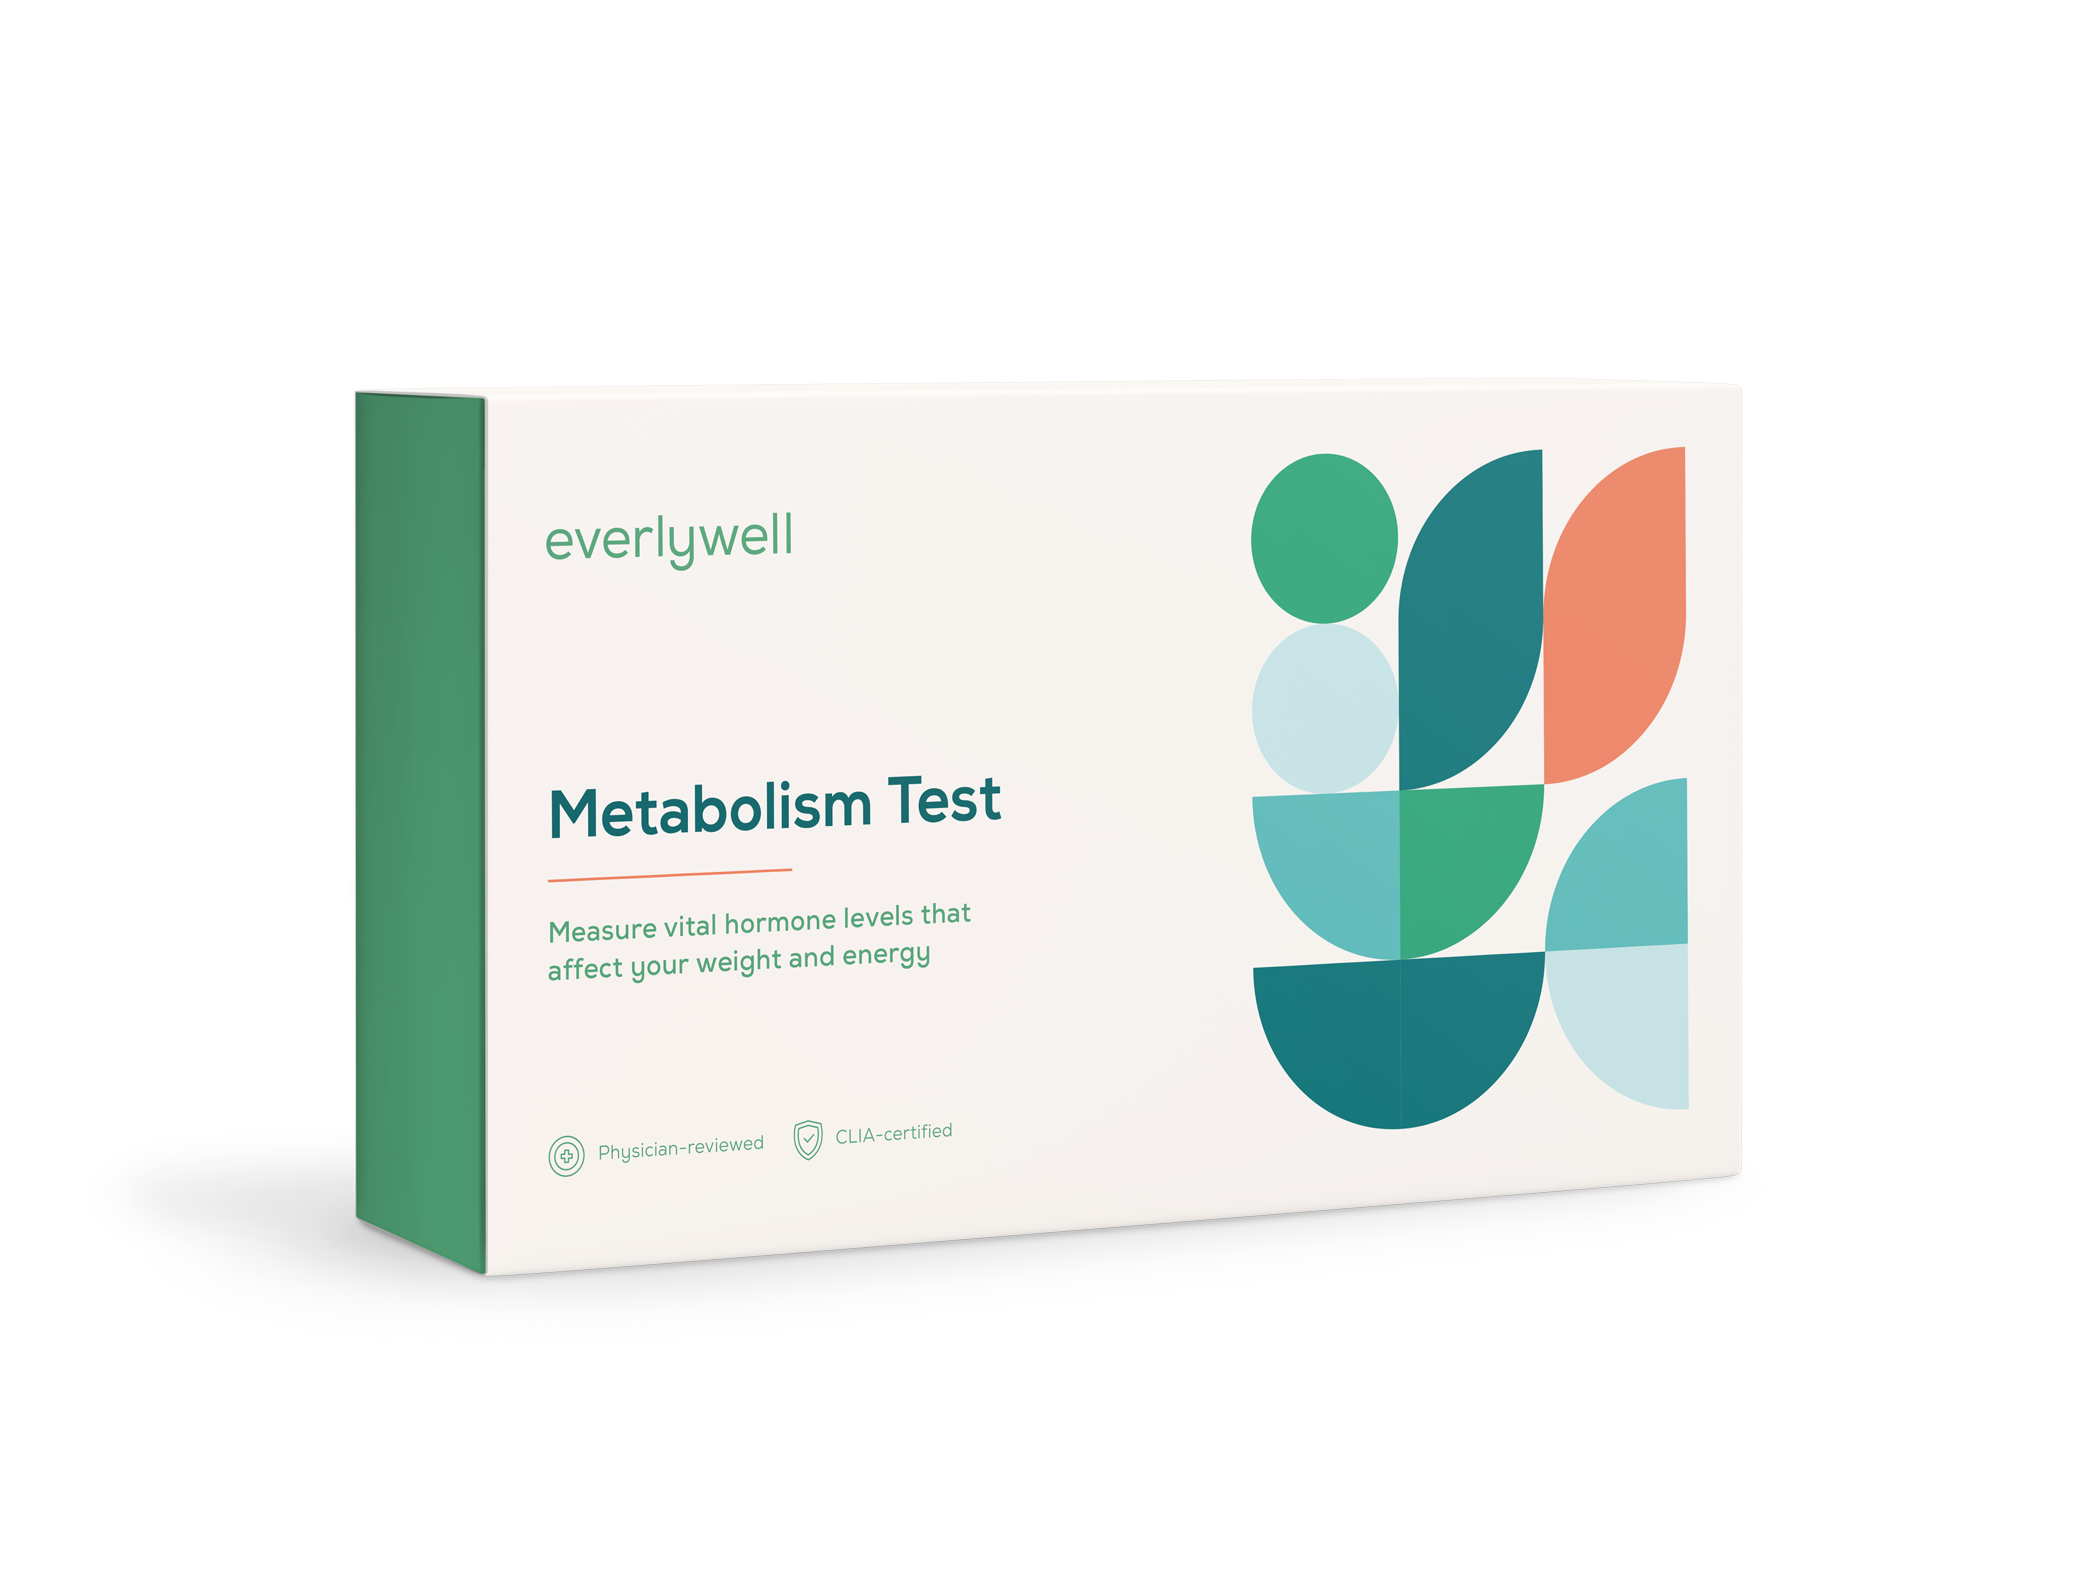 Learn About Women's Health Testing News with Our at Home Health Test Kits